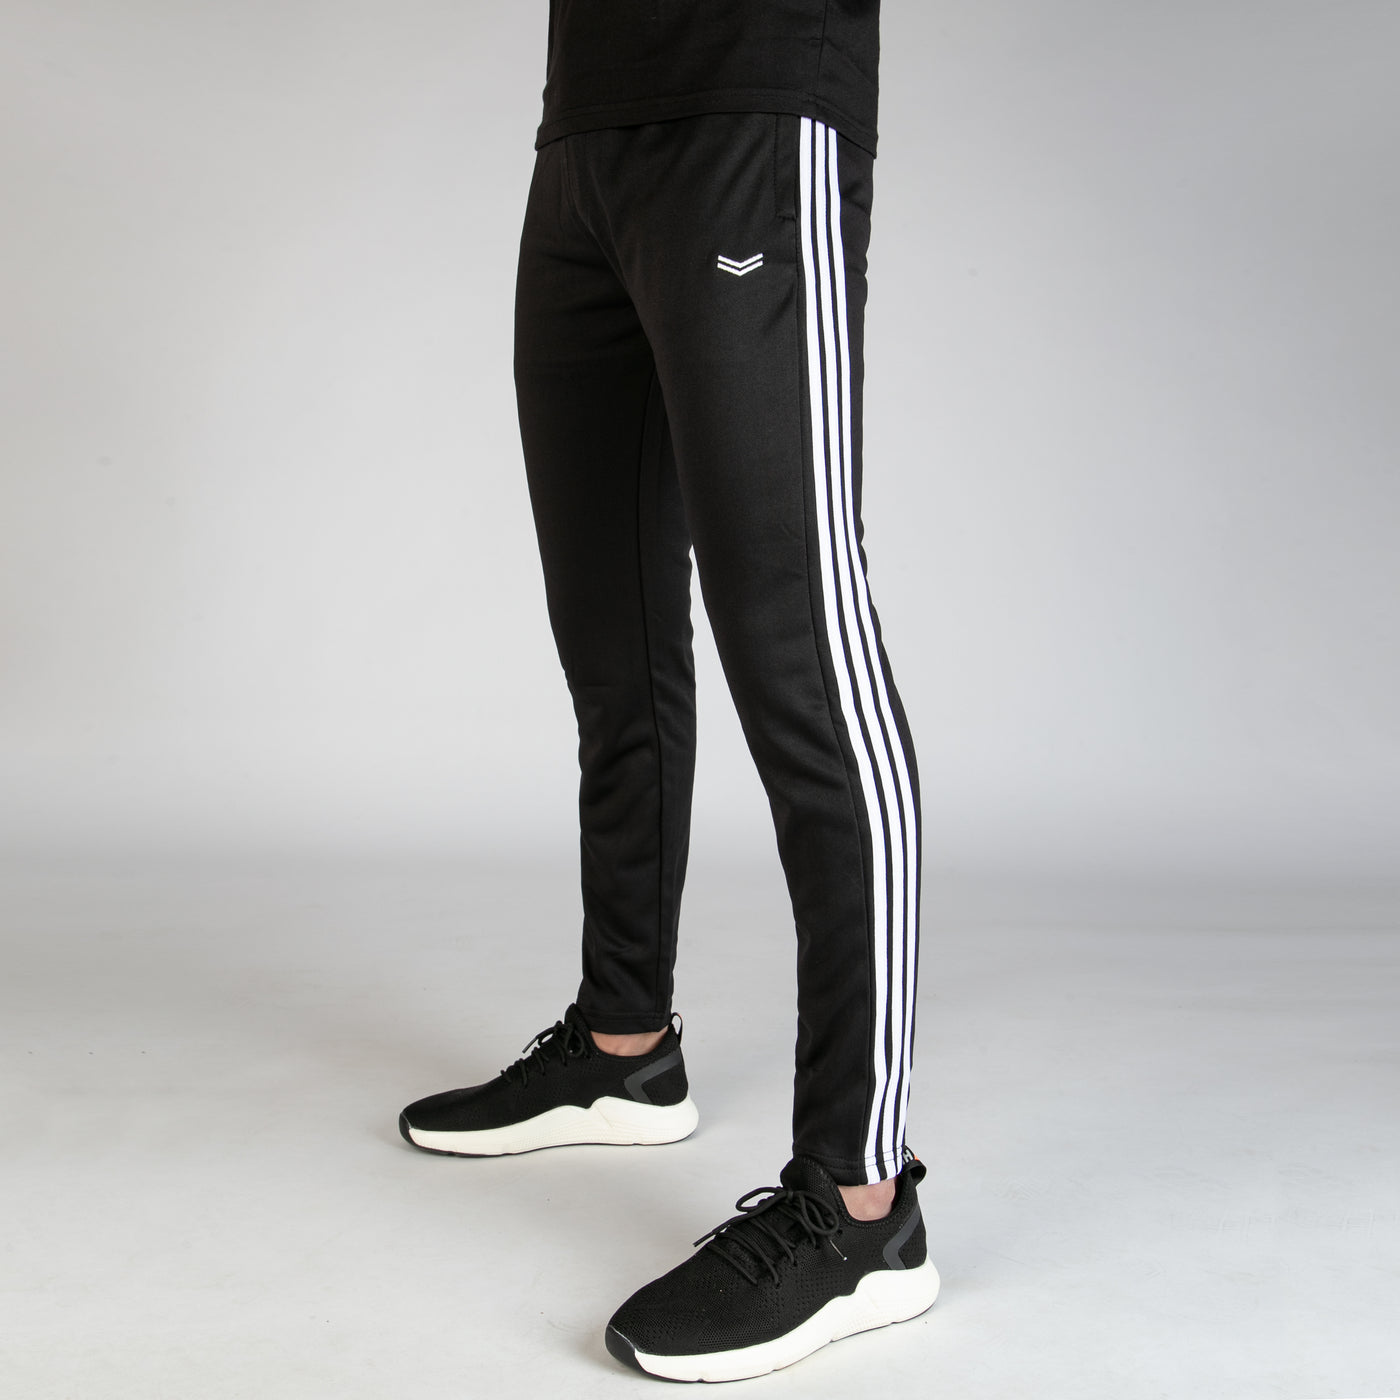 Black Quick Dry Bottoms With Three White Stripes